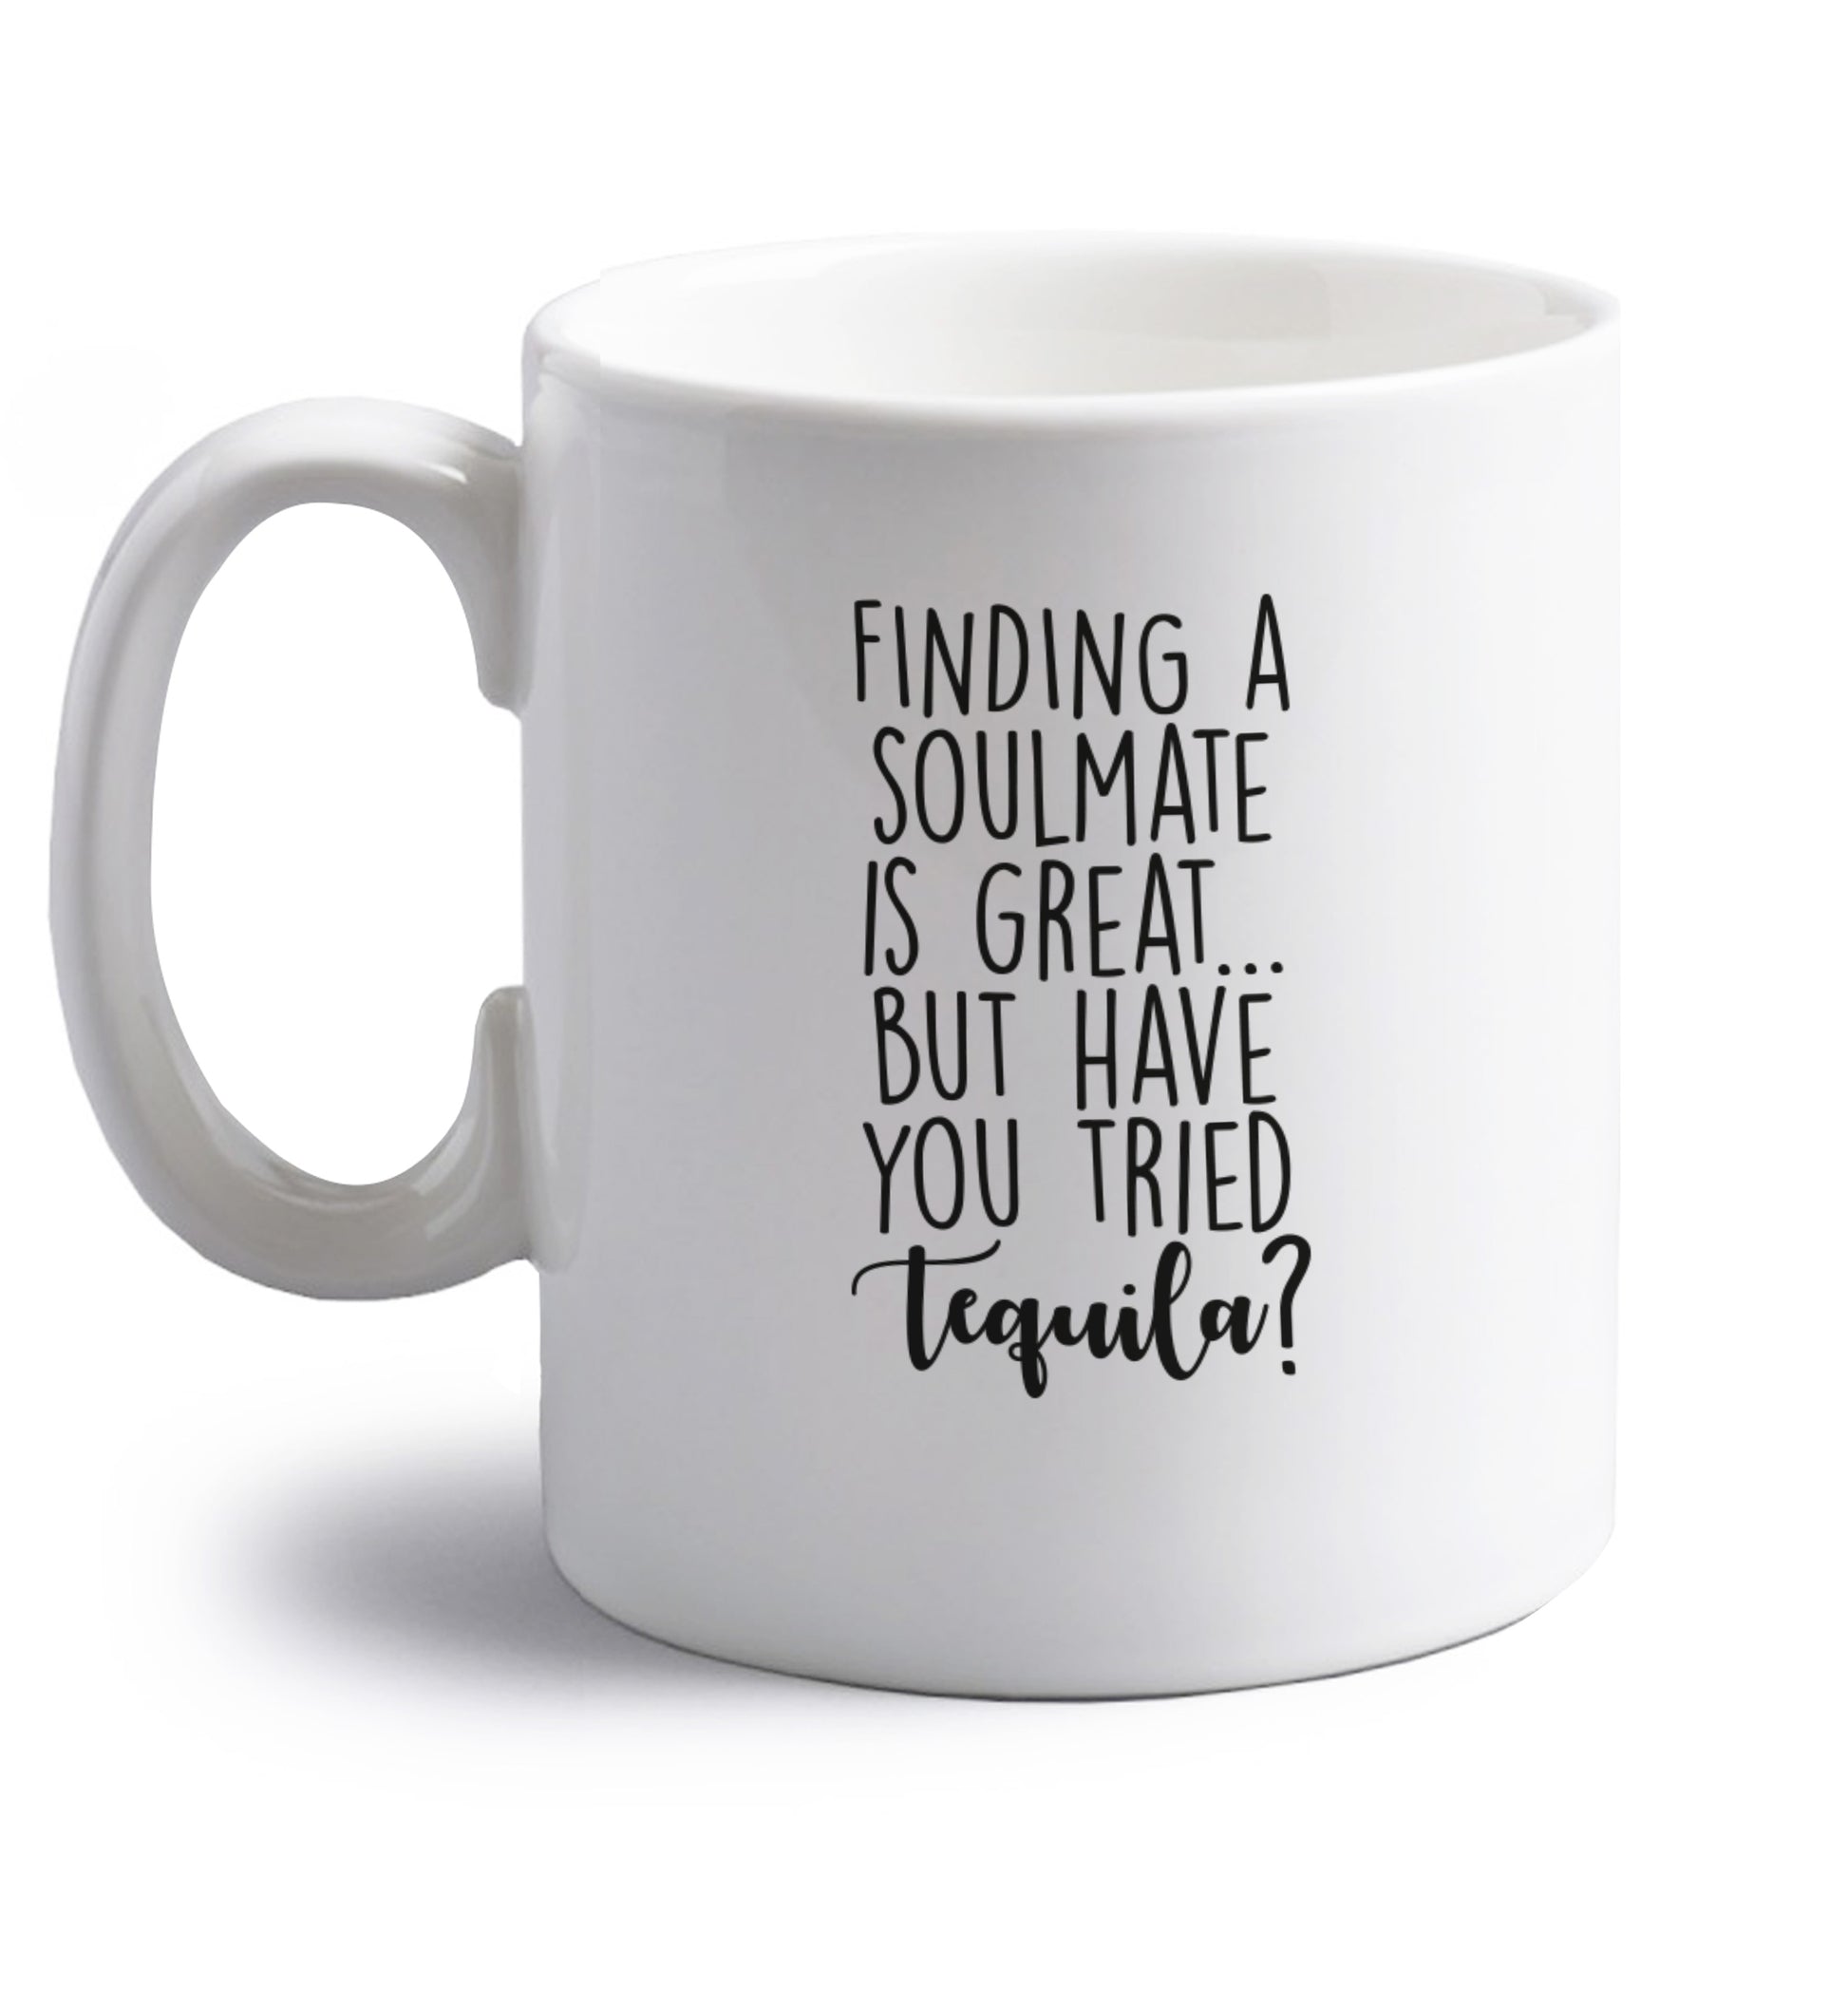 Finding a soulmate is great but have you tried tequila? right handed white ceramic mug 